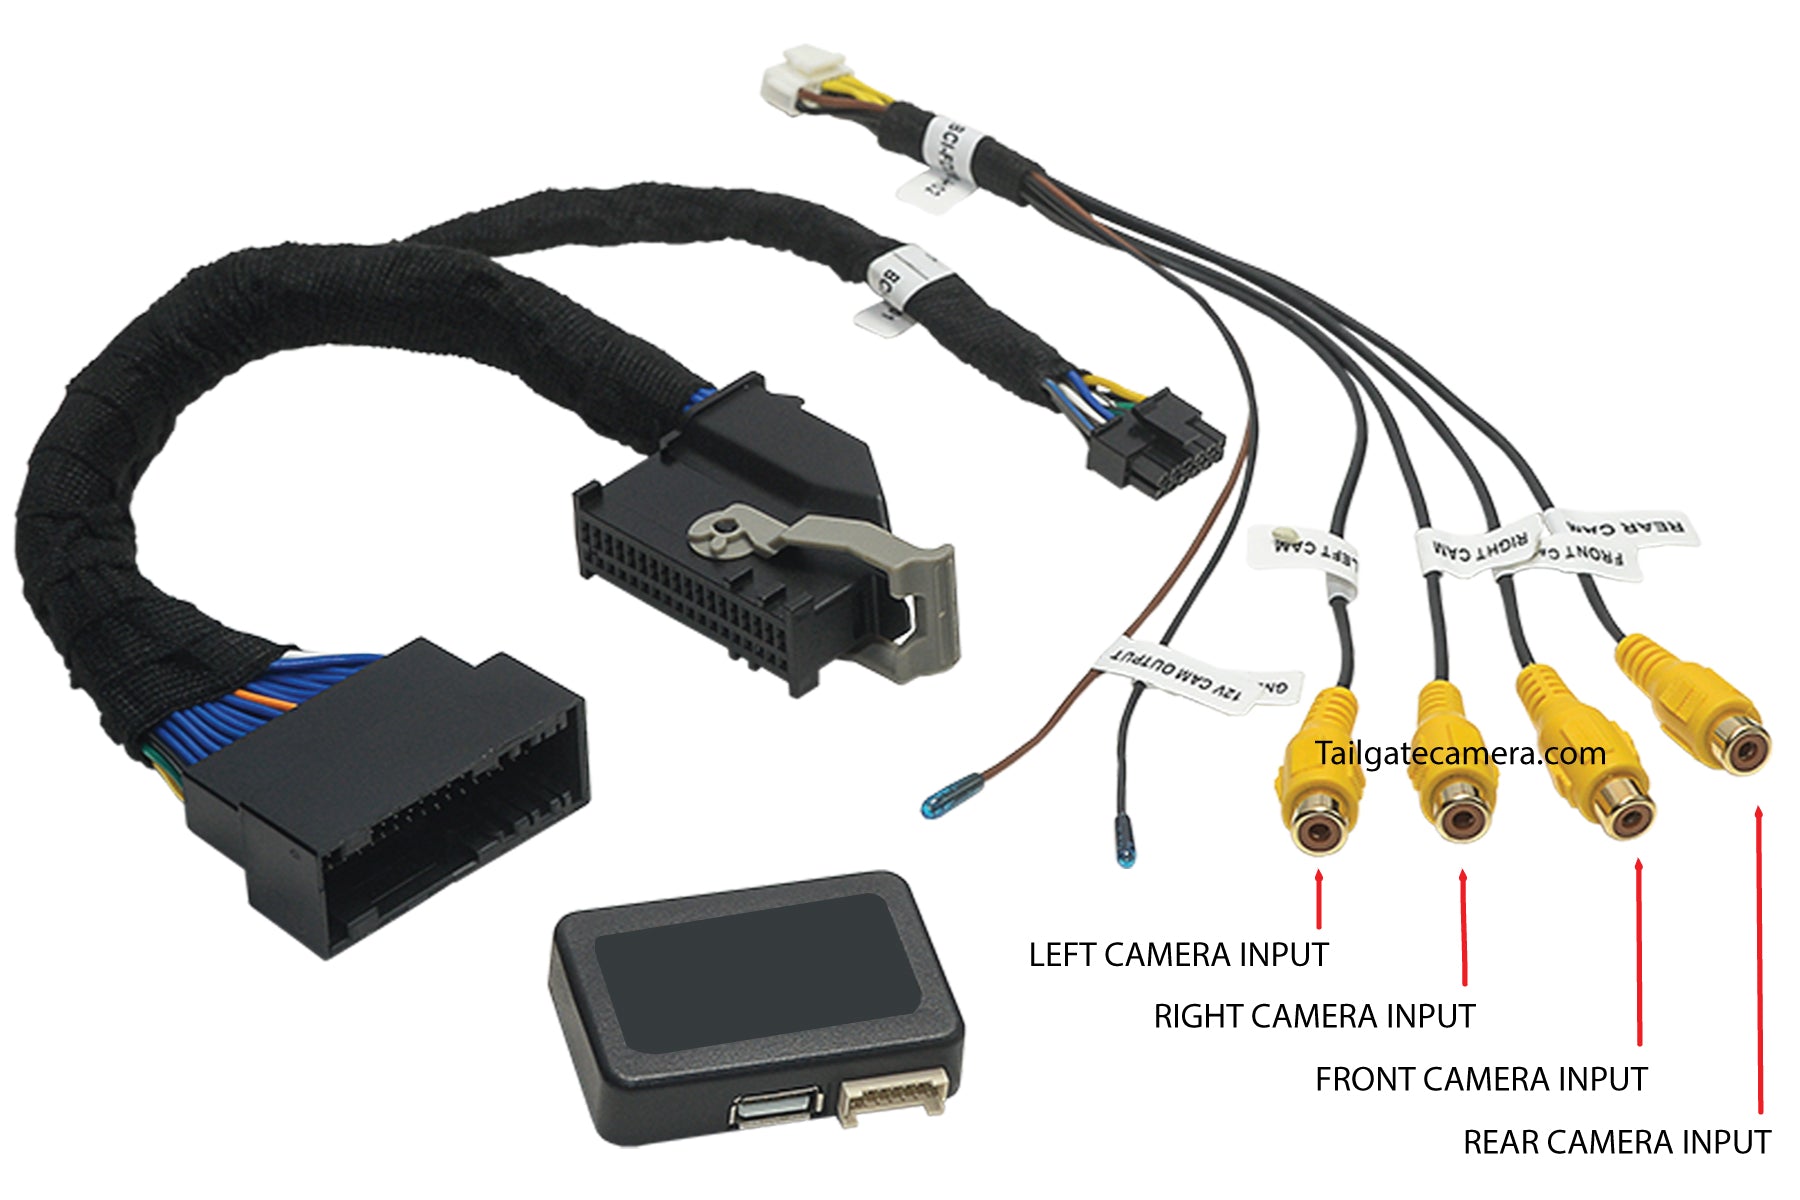 Camera Interface for Ford MyFord Touch 8.4” Radios